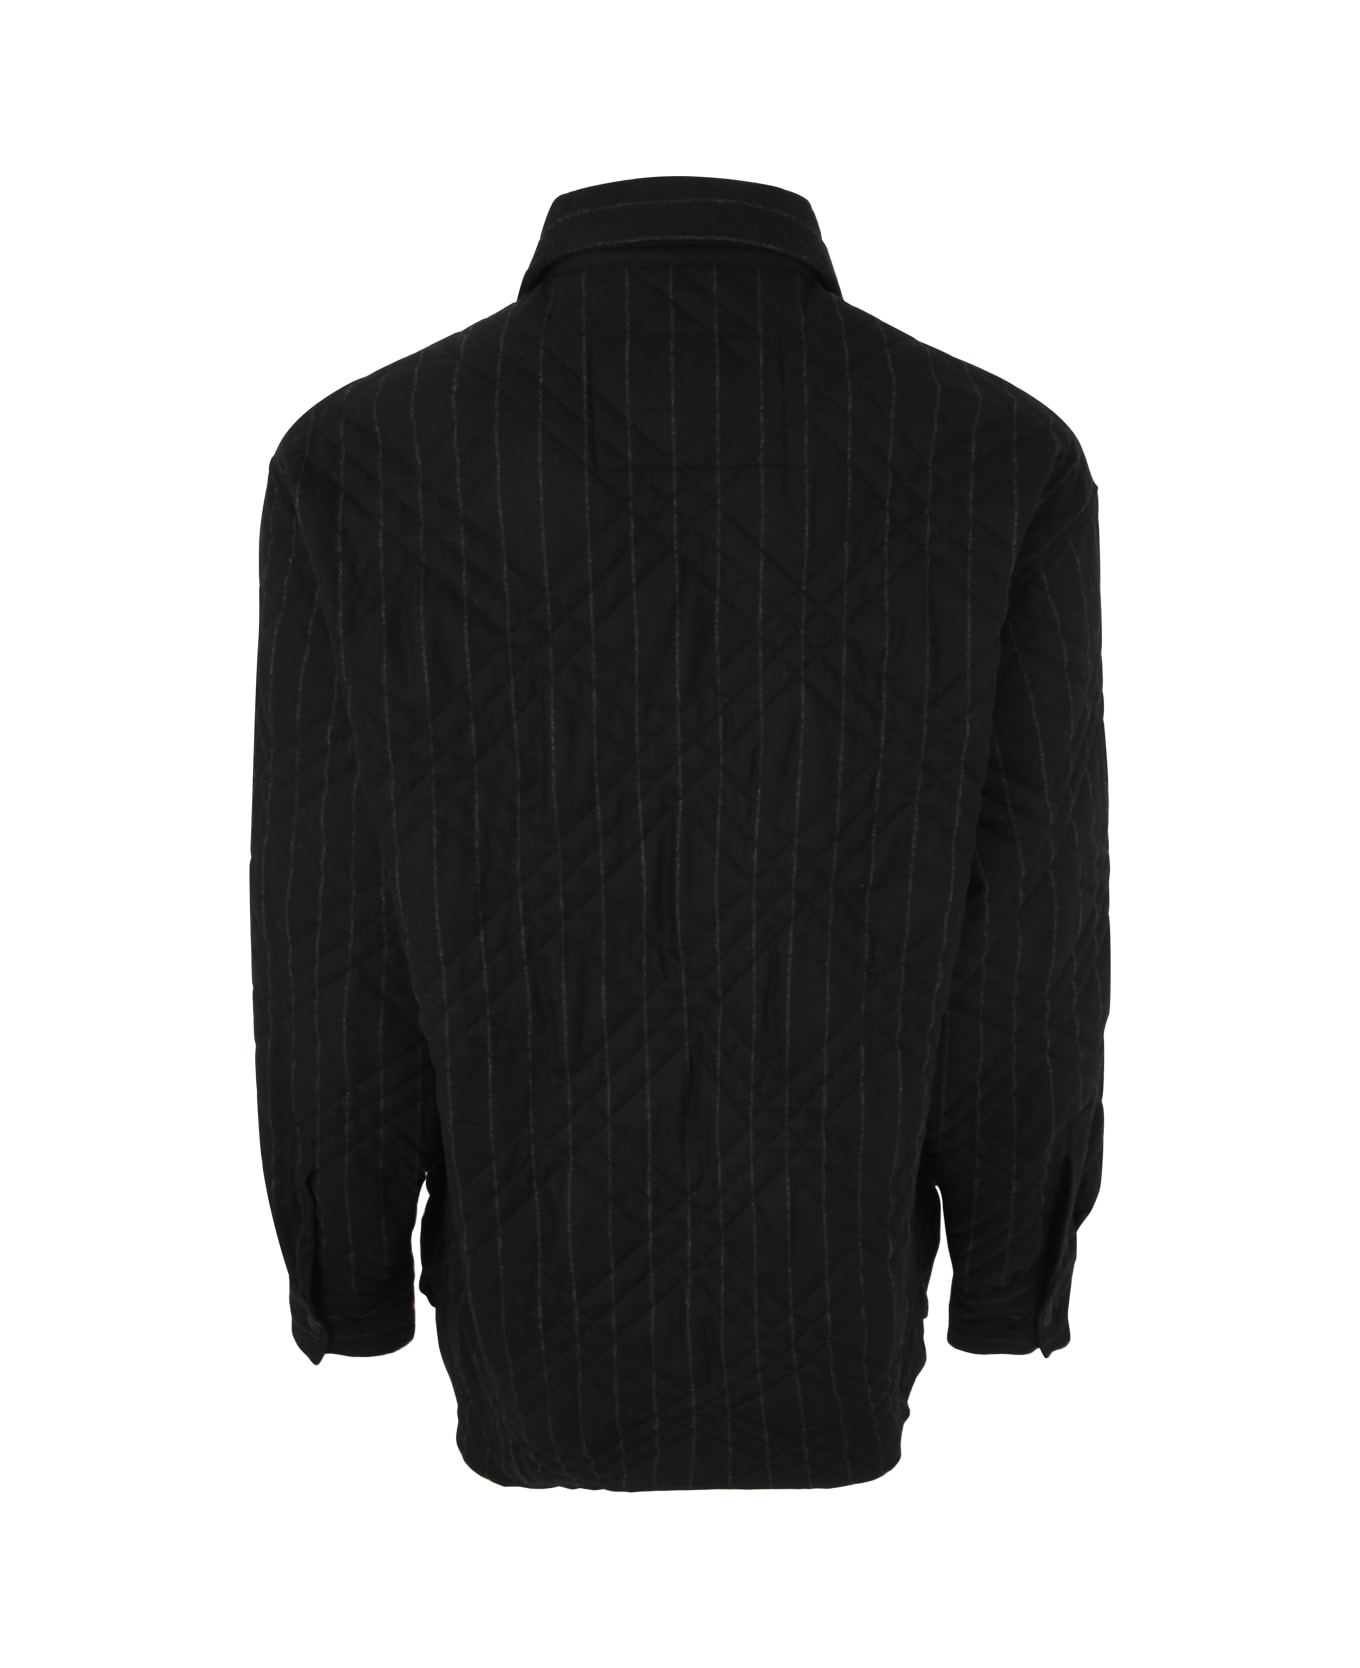 Versace Jeans Couture Pinstriped Jacket - Black ジャケット